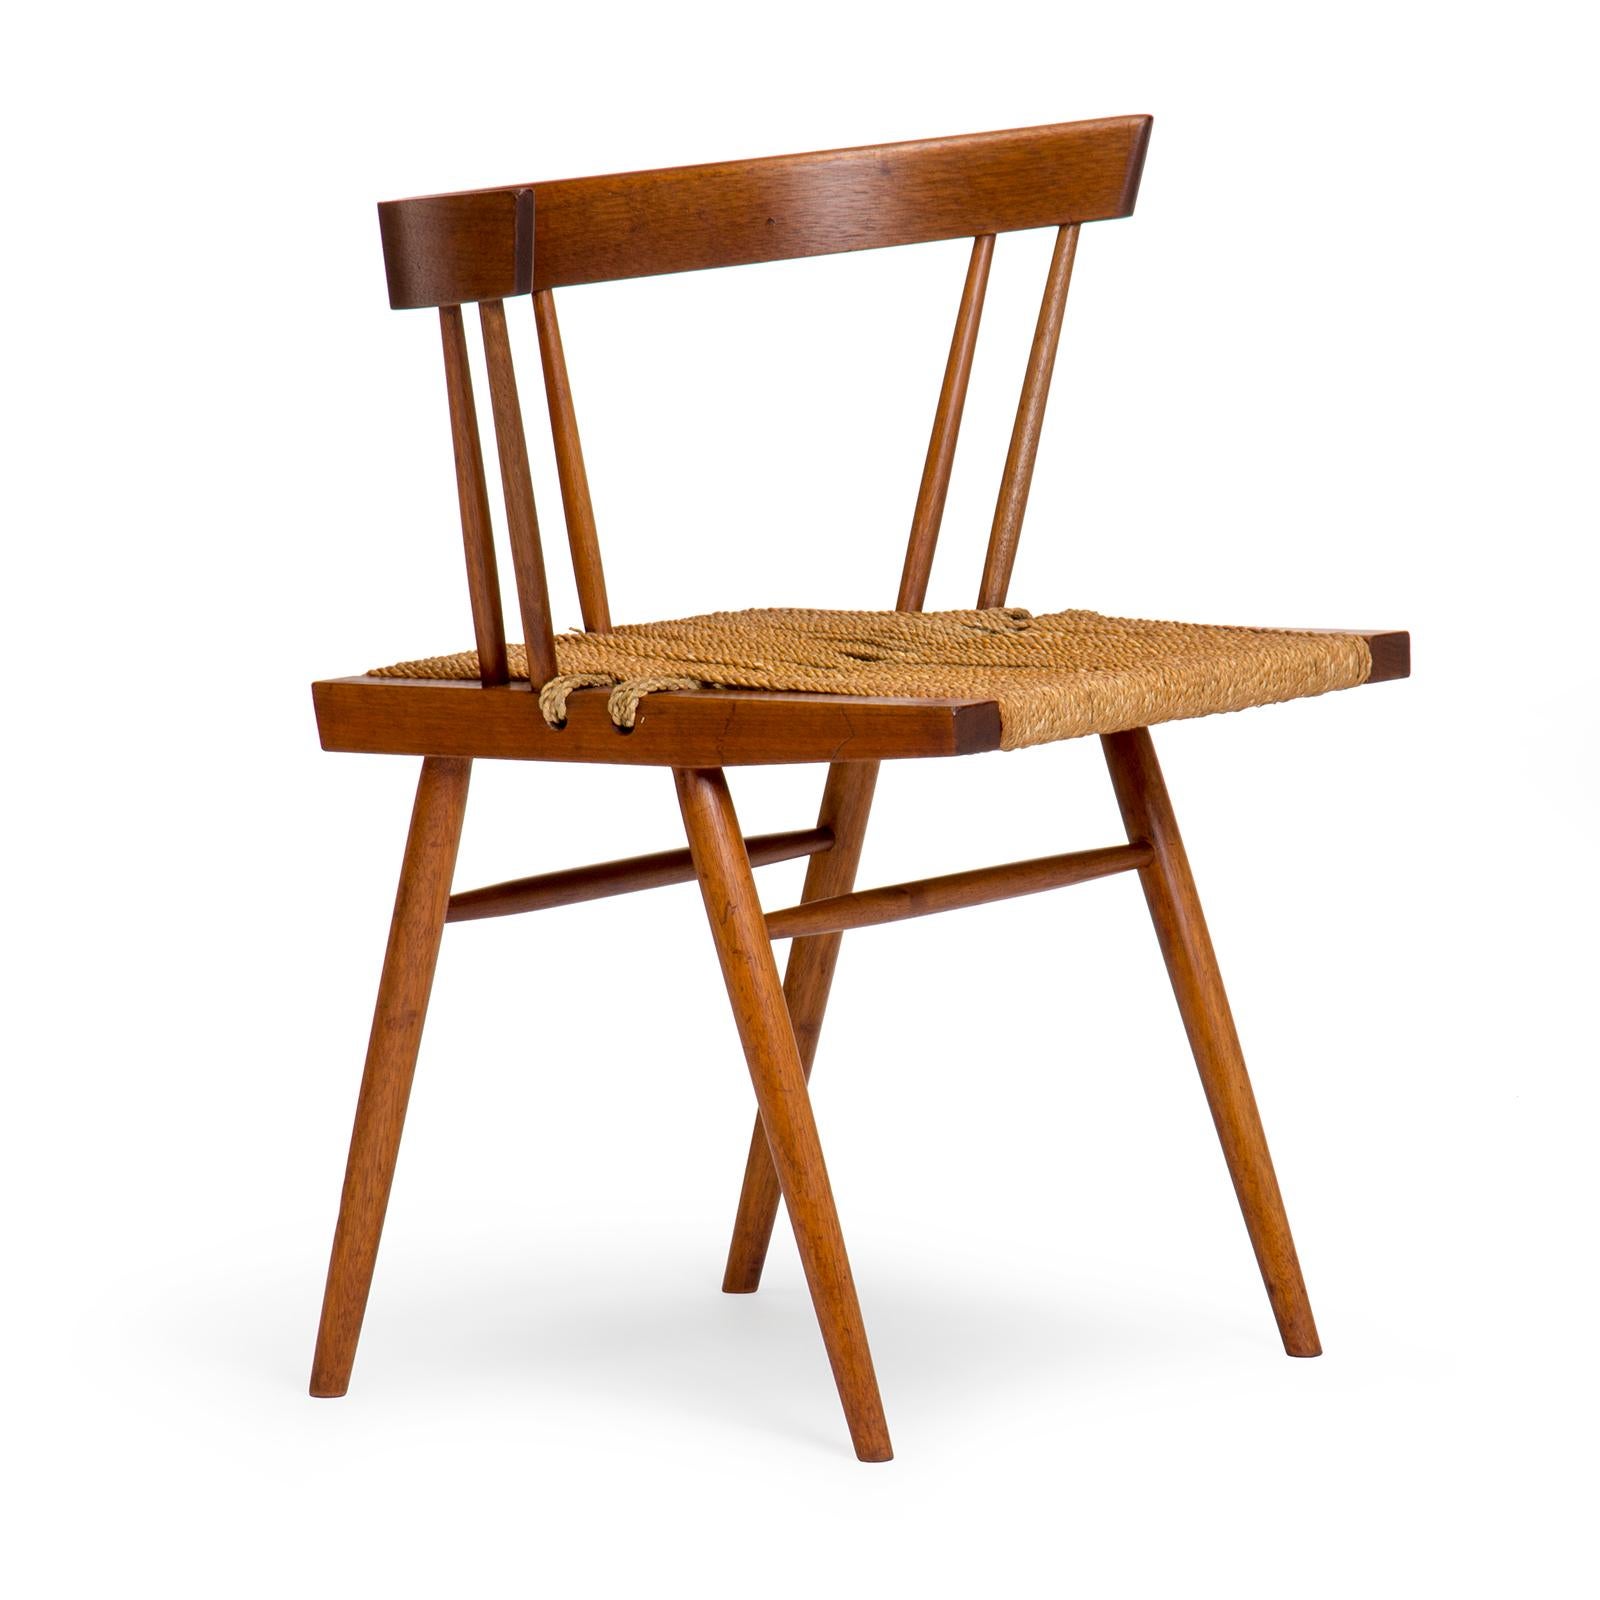 Mid-20th Century Walnut Dining Chair or Side Chair by George Nakashima